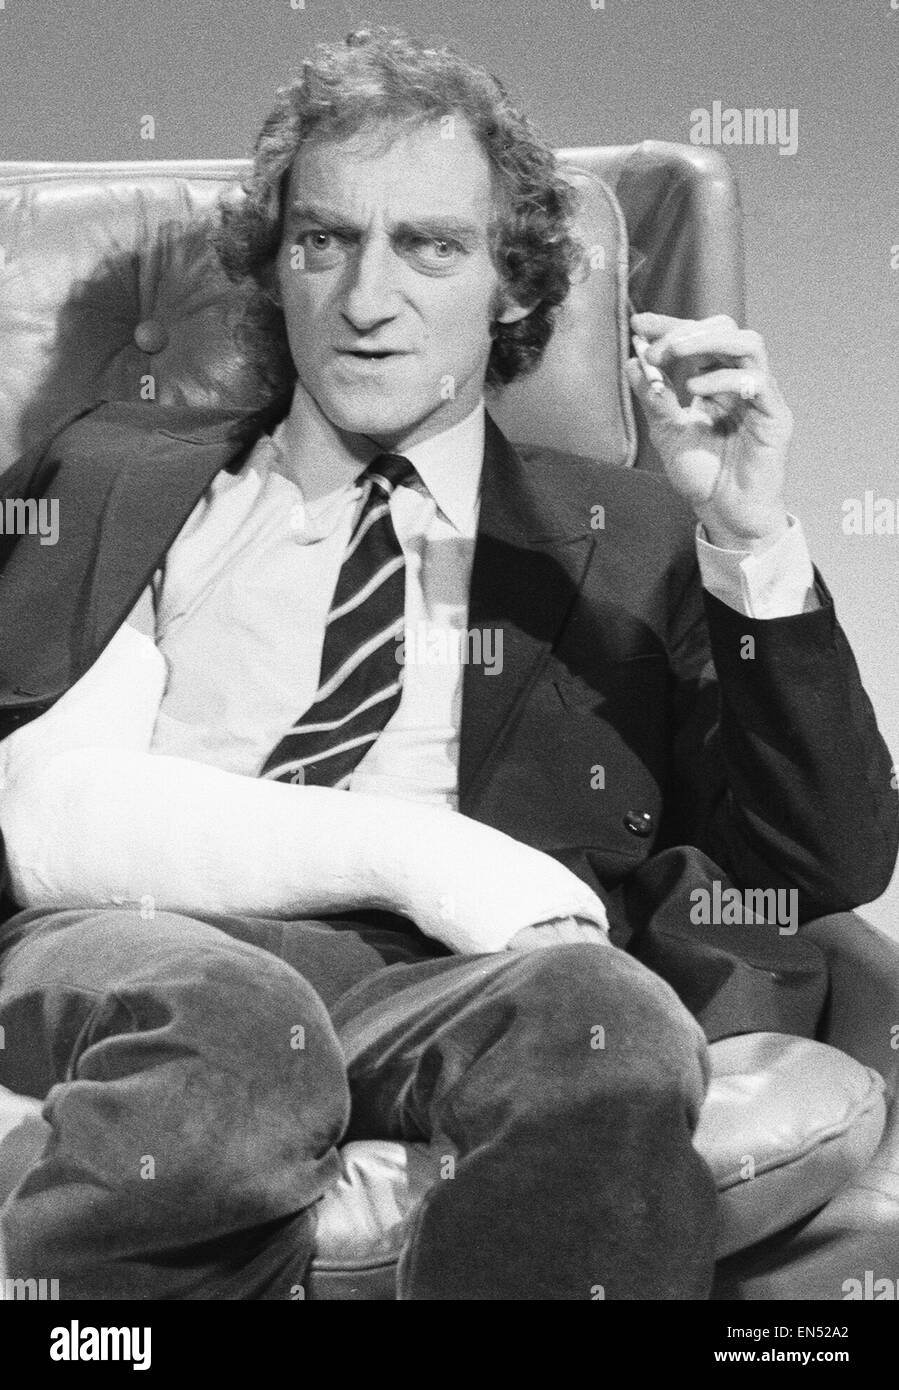 Zany comedian Marty Feldman seen here on the set of his new television series, 'The Comedy Machine' at Elstree Studios. Marty's arm is in plaster after he fell 20ft from some curtains whilst filming. The fall resulted in Marty breaking his arm in two plac Stock Photo